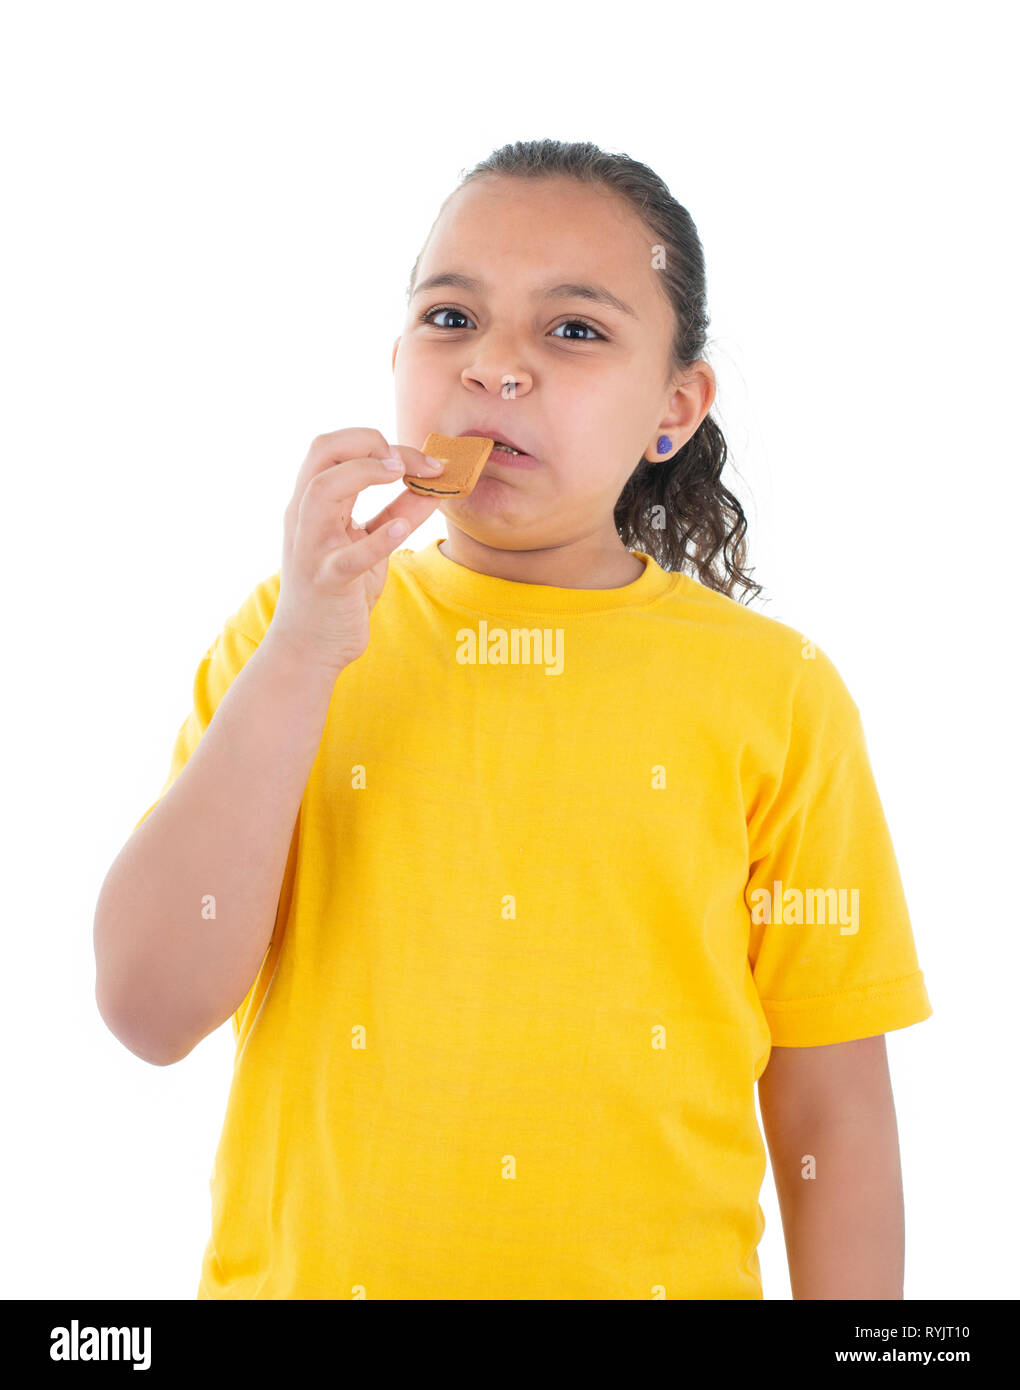 A Girl Expressing Disgust, Bad Food Taste, Isolated on White Stock Photo